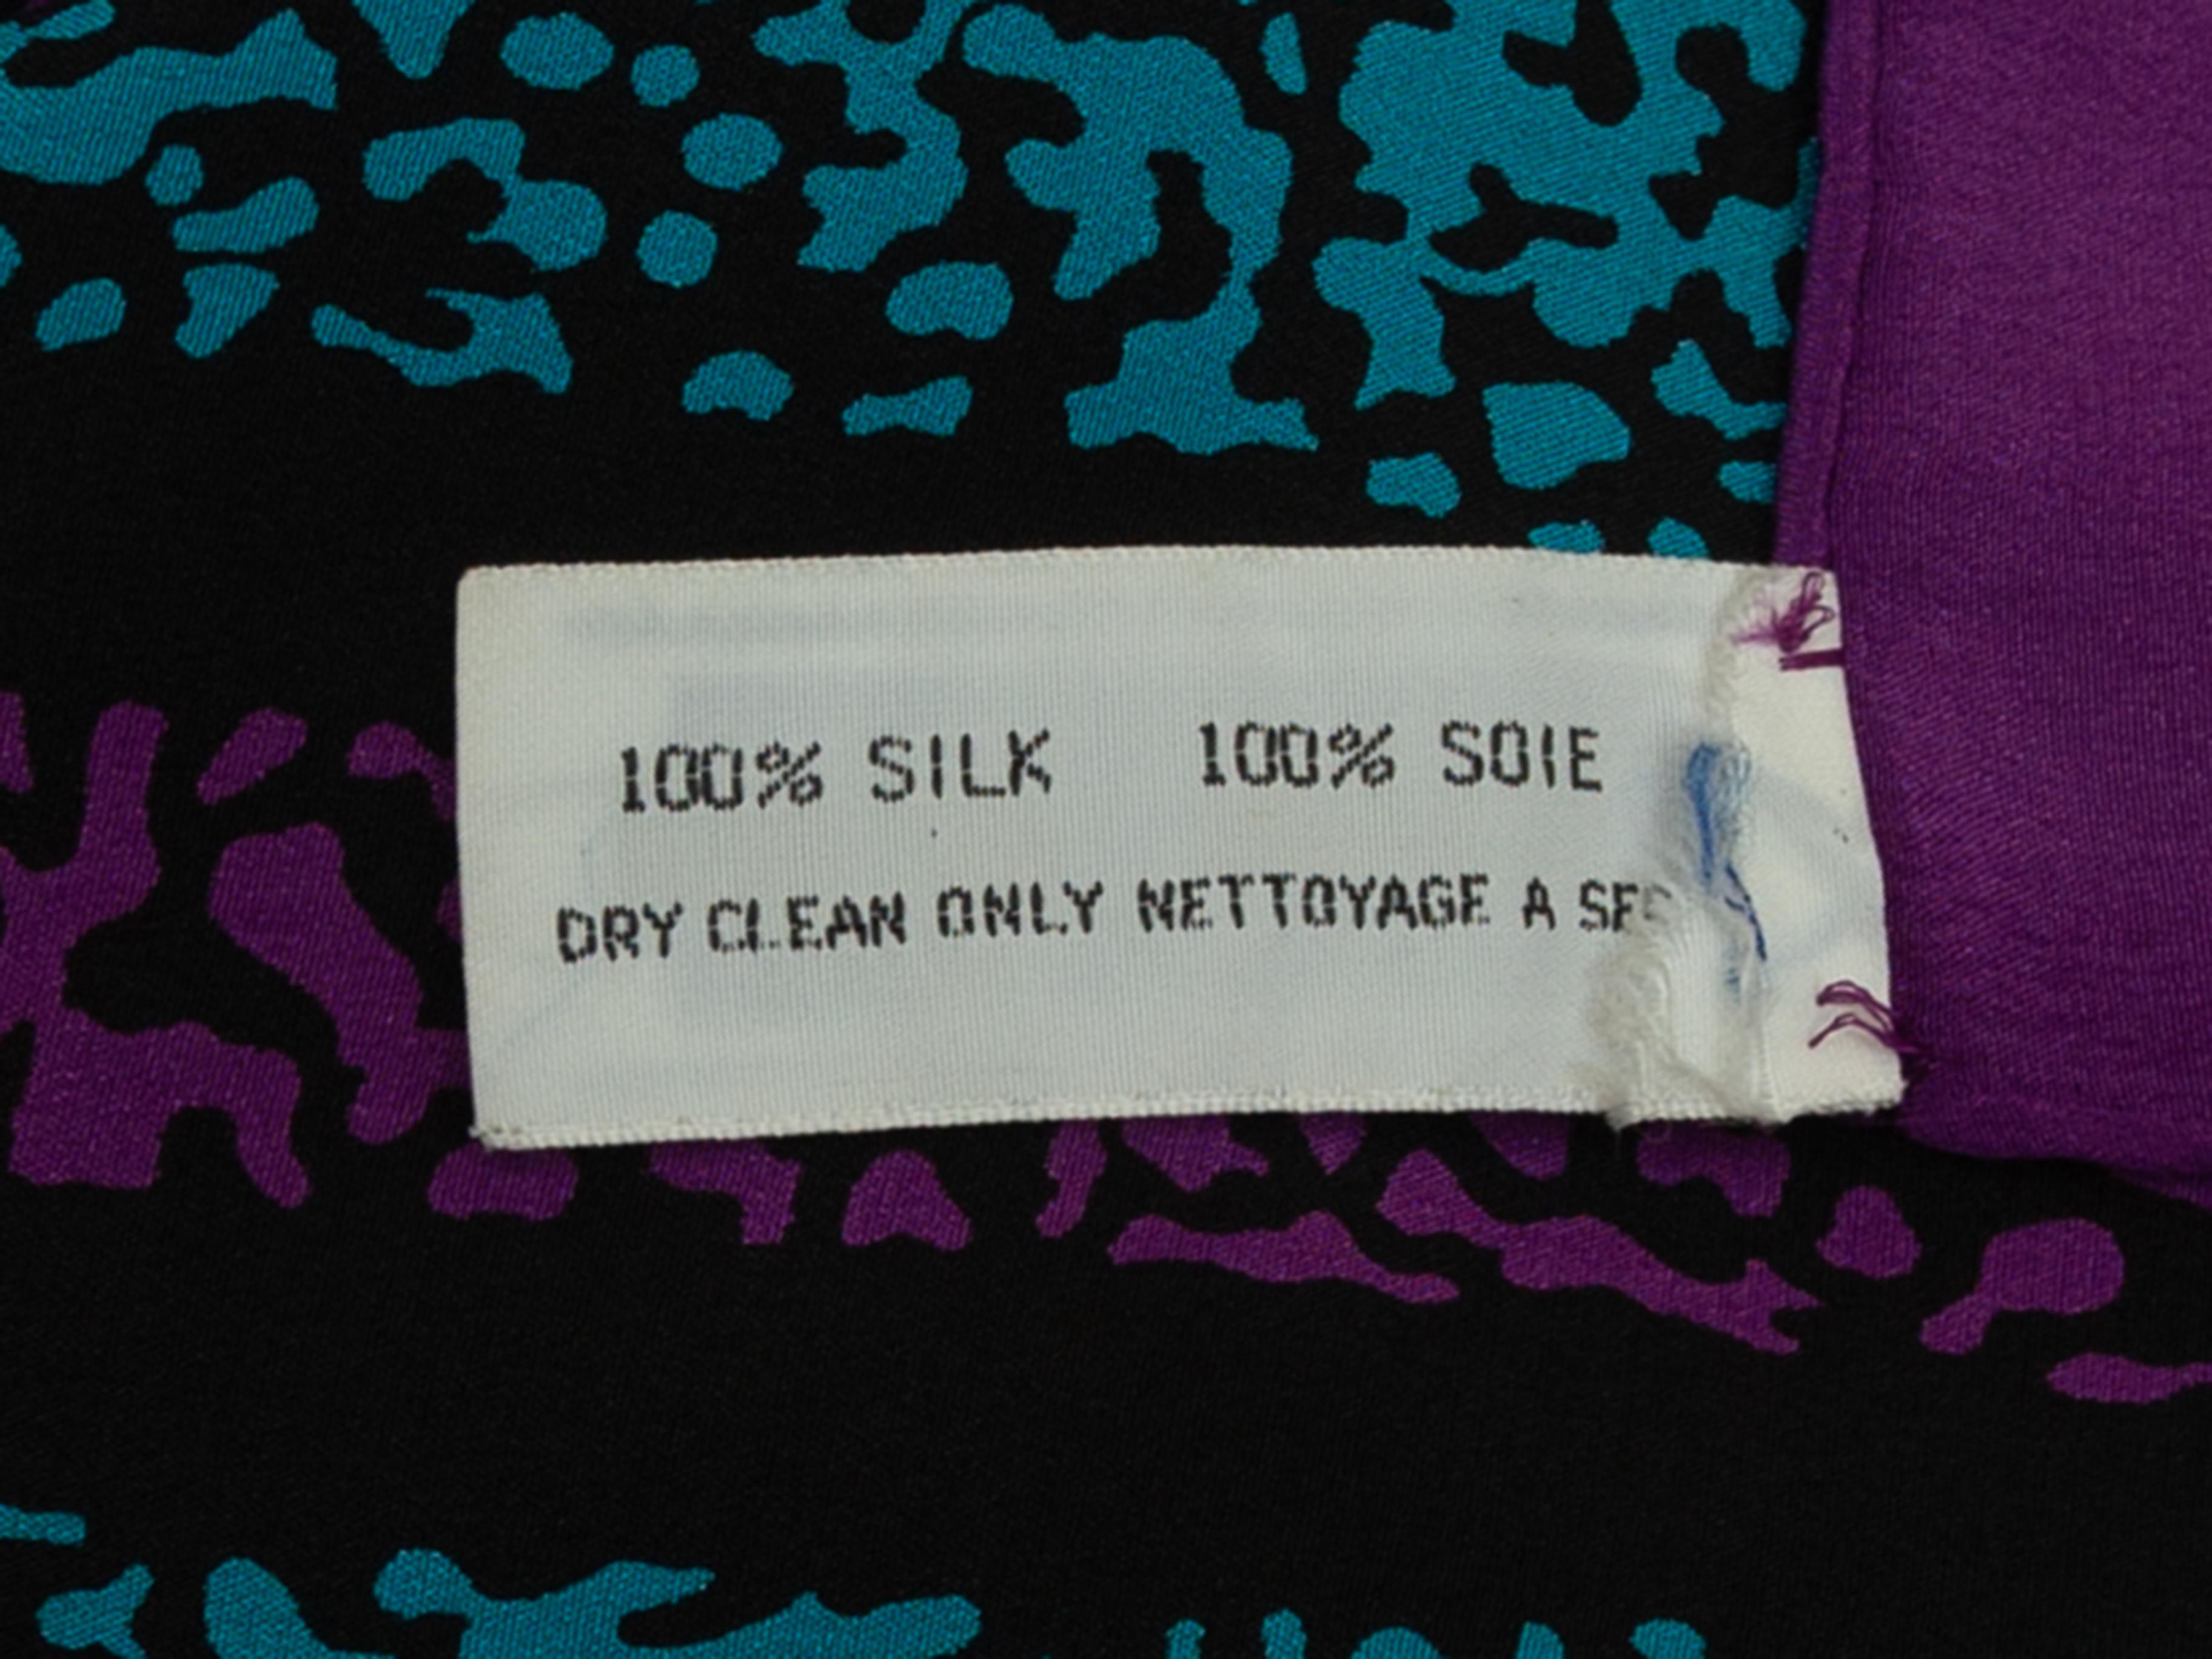 Product details: Vintage black, purple and turquoise silk scarf by Yves Saint Laurent. Striped print throughout. 34